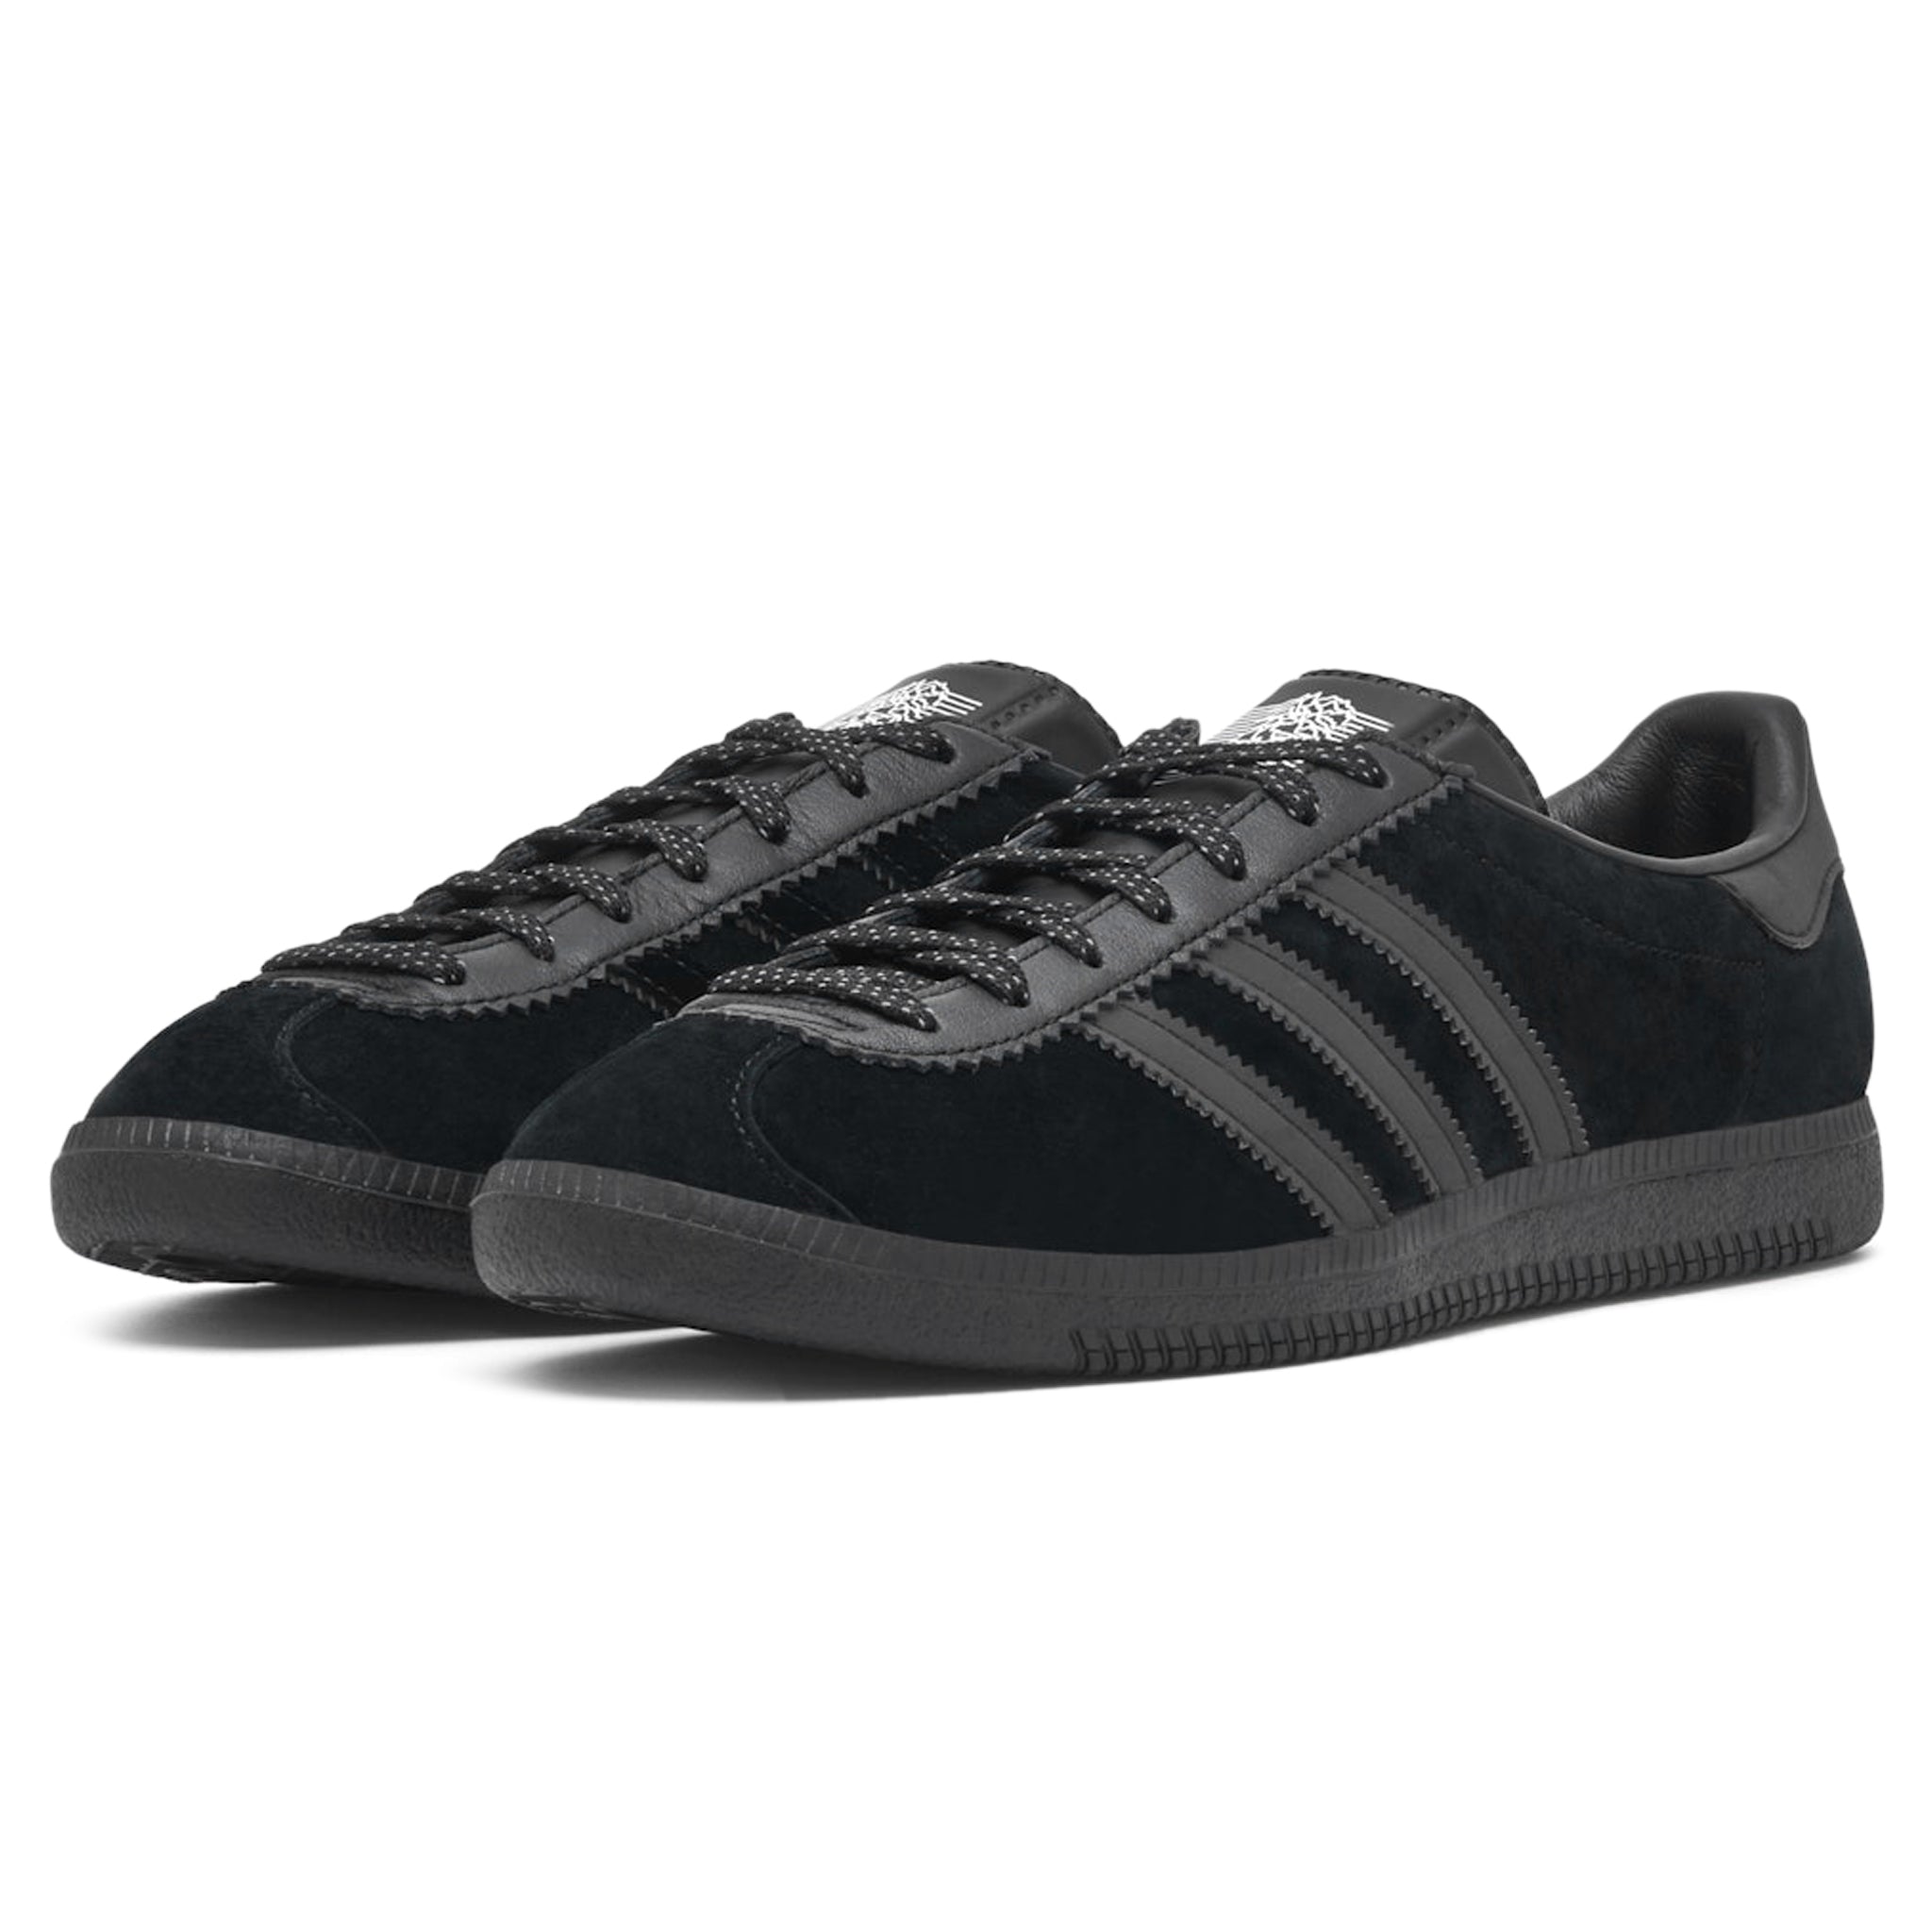 Front side view of Peter Saville x Adidas Pulsebeat Spezial Black Carbon GV9031